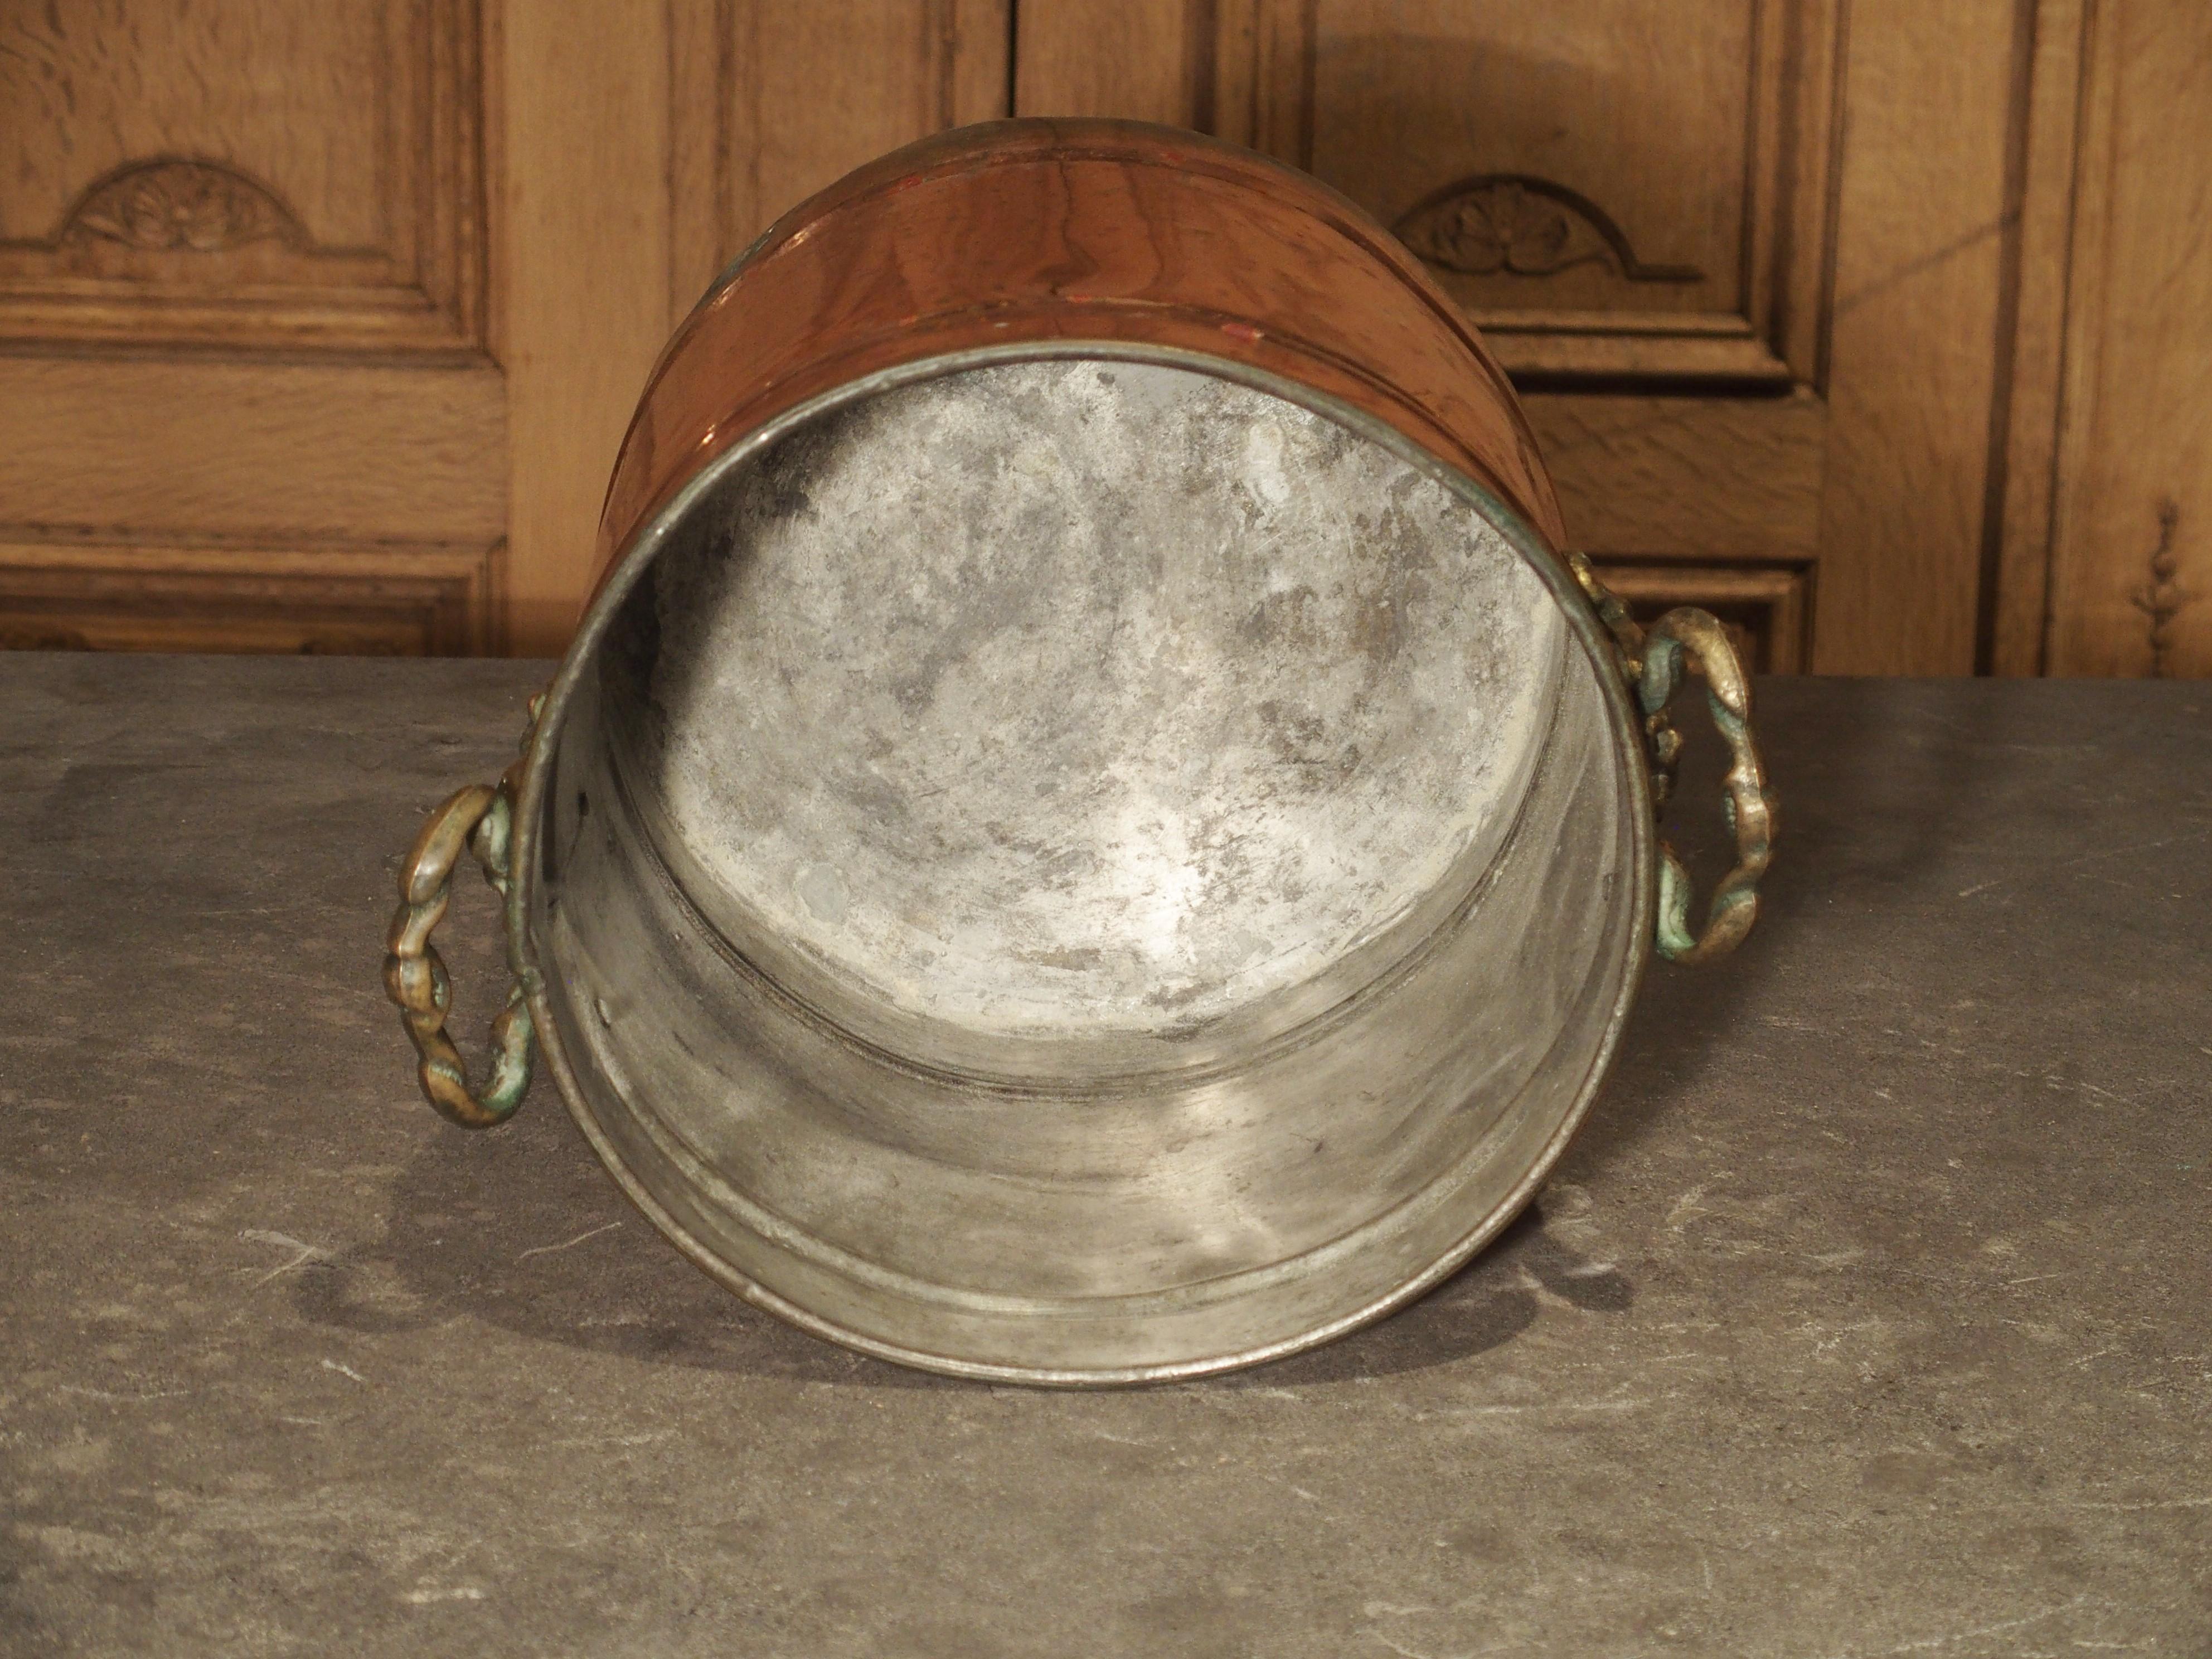 This English wine bucket is made of copper with decorative brass grape leaf handles on either side. It is perfectly round with three ribs of molding going around it. Perfect for your wine bottles, this English wine bucket will be a great addition to